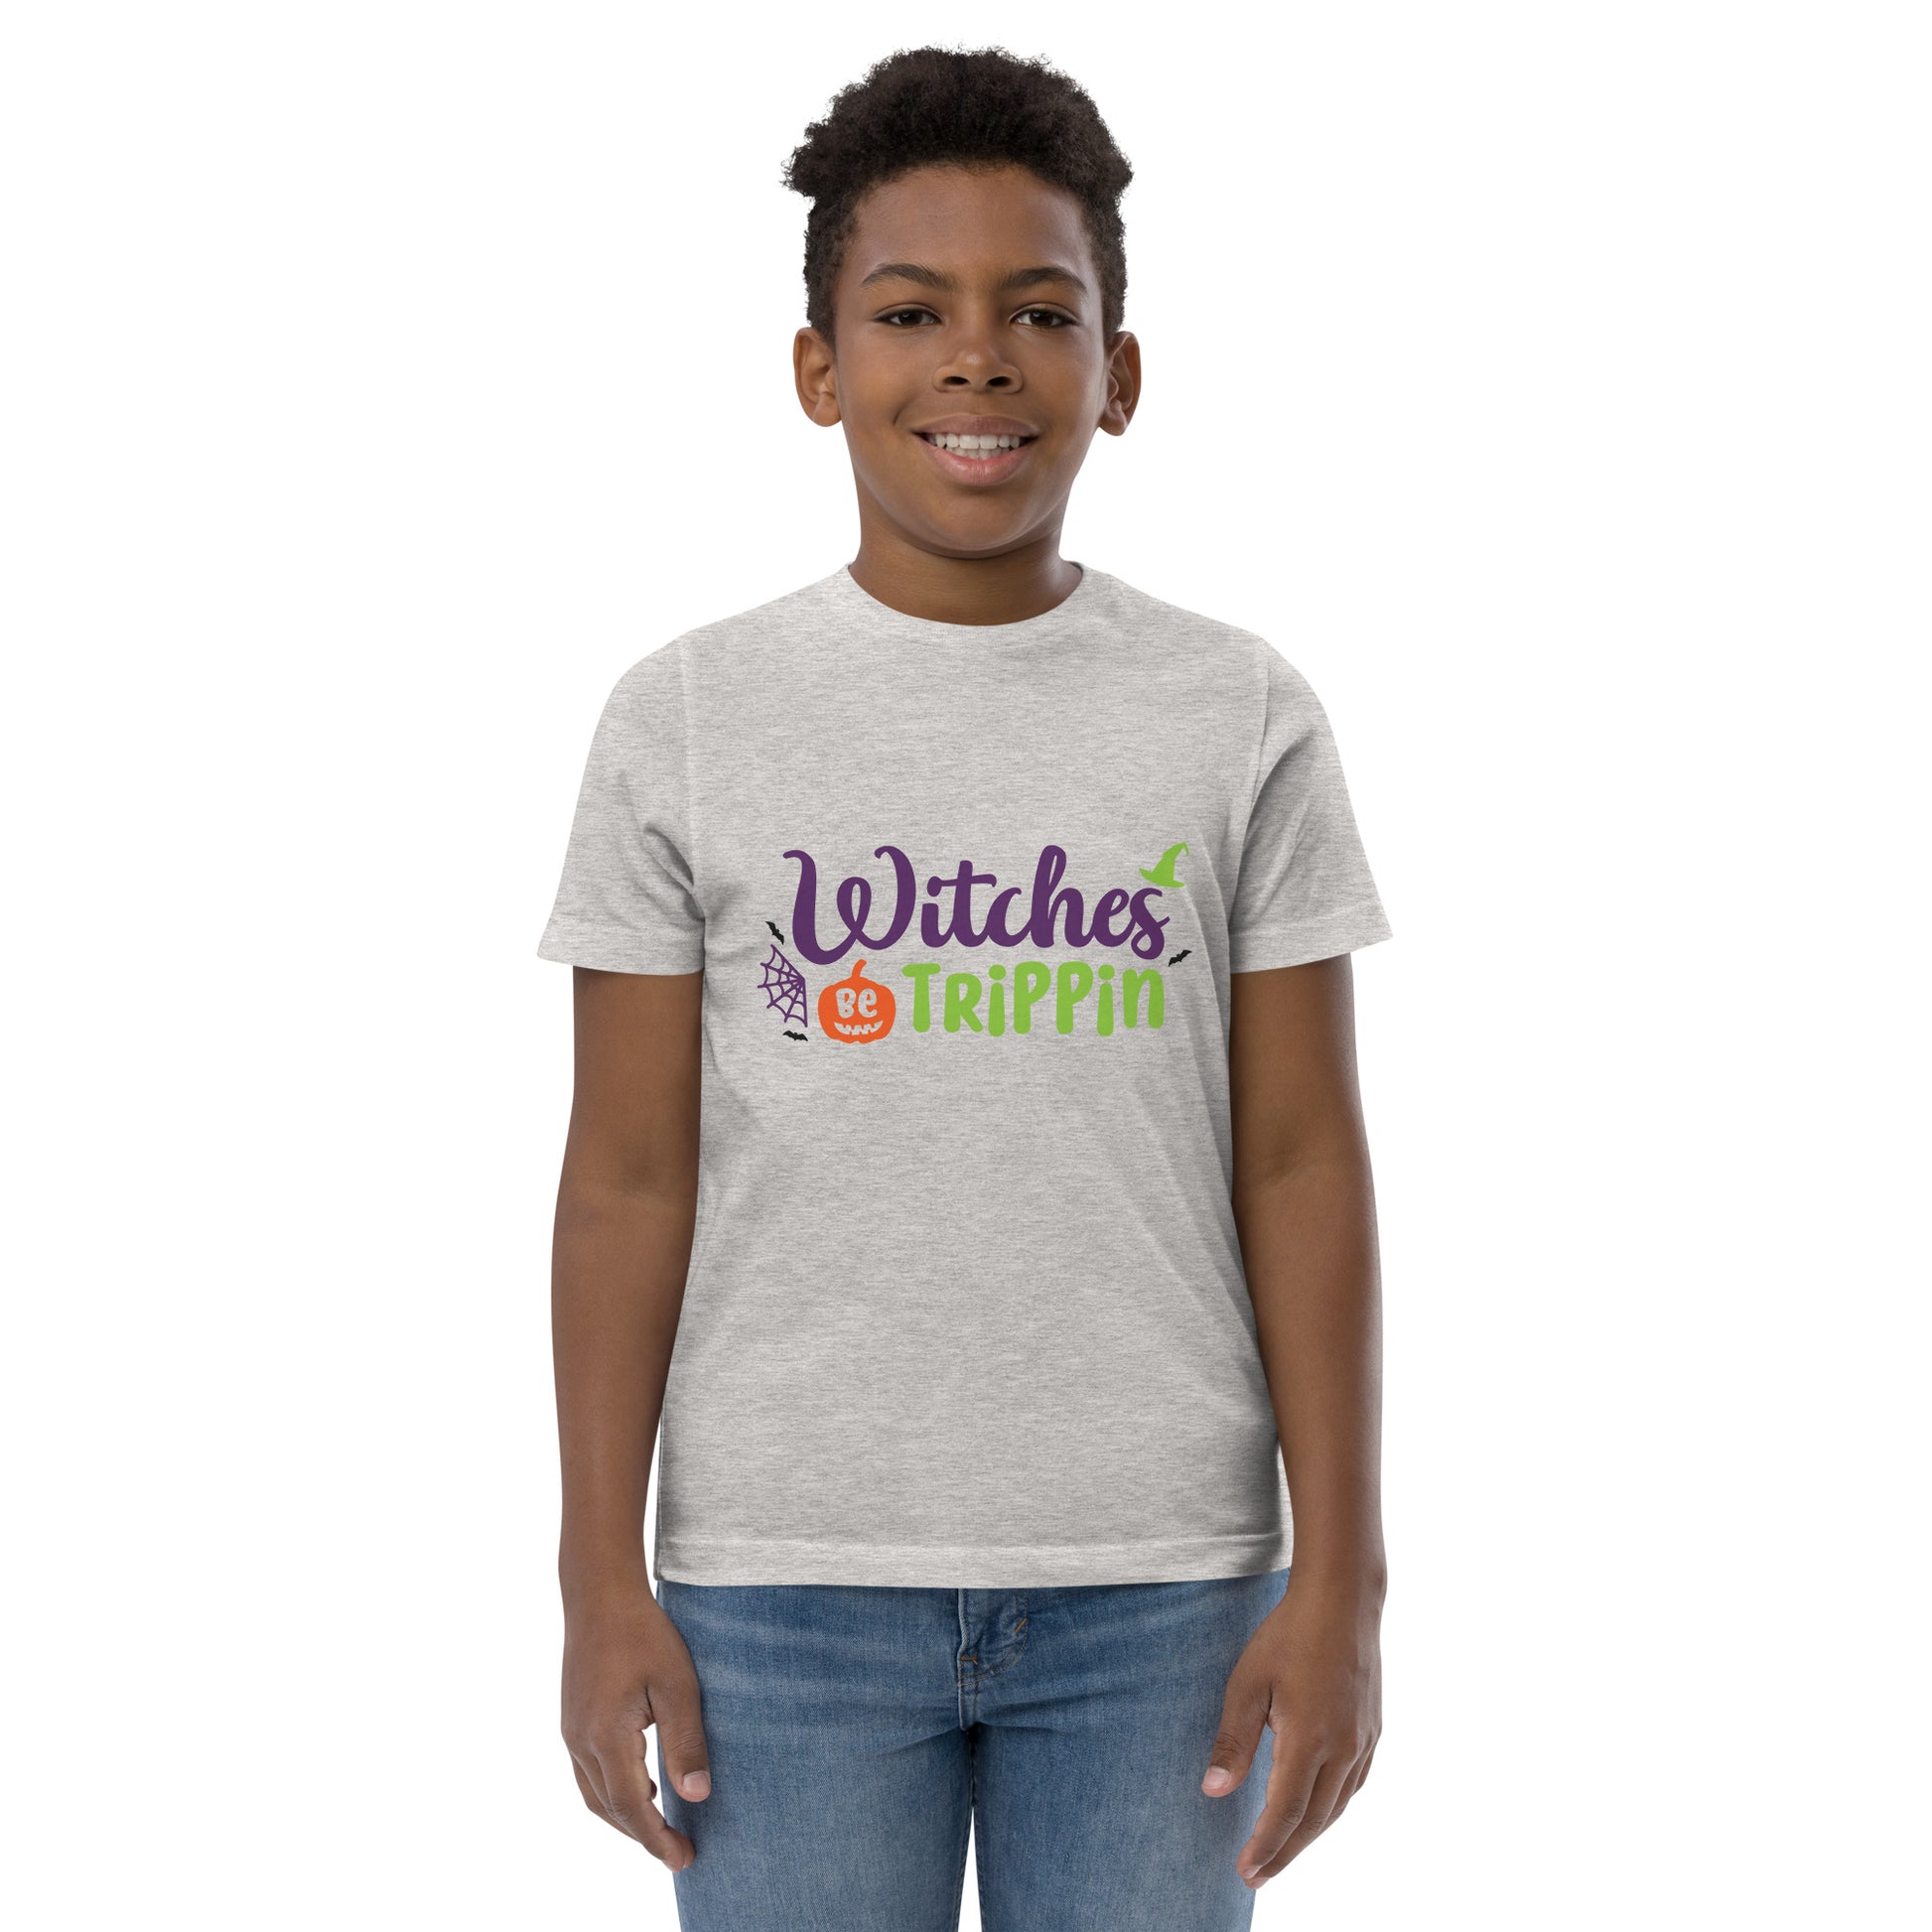 Witches Be Trippin' Youth jersey t-shirt